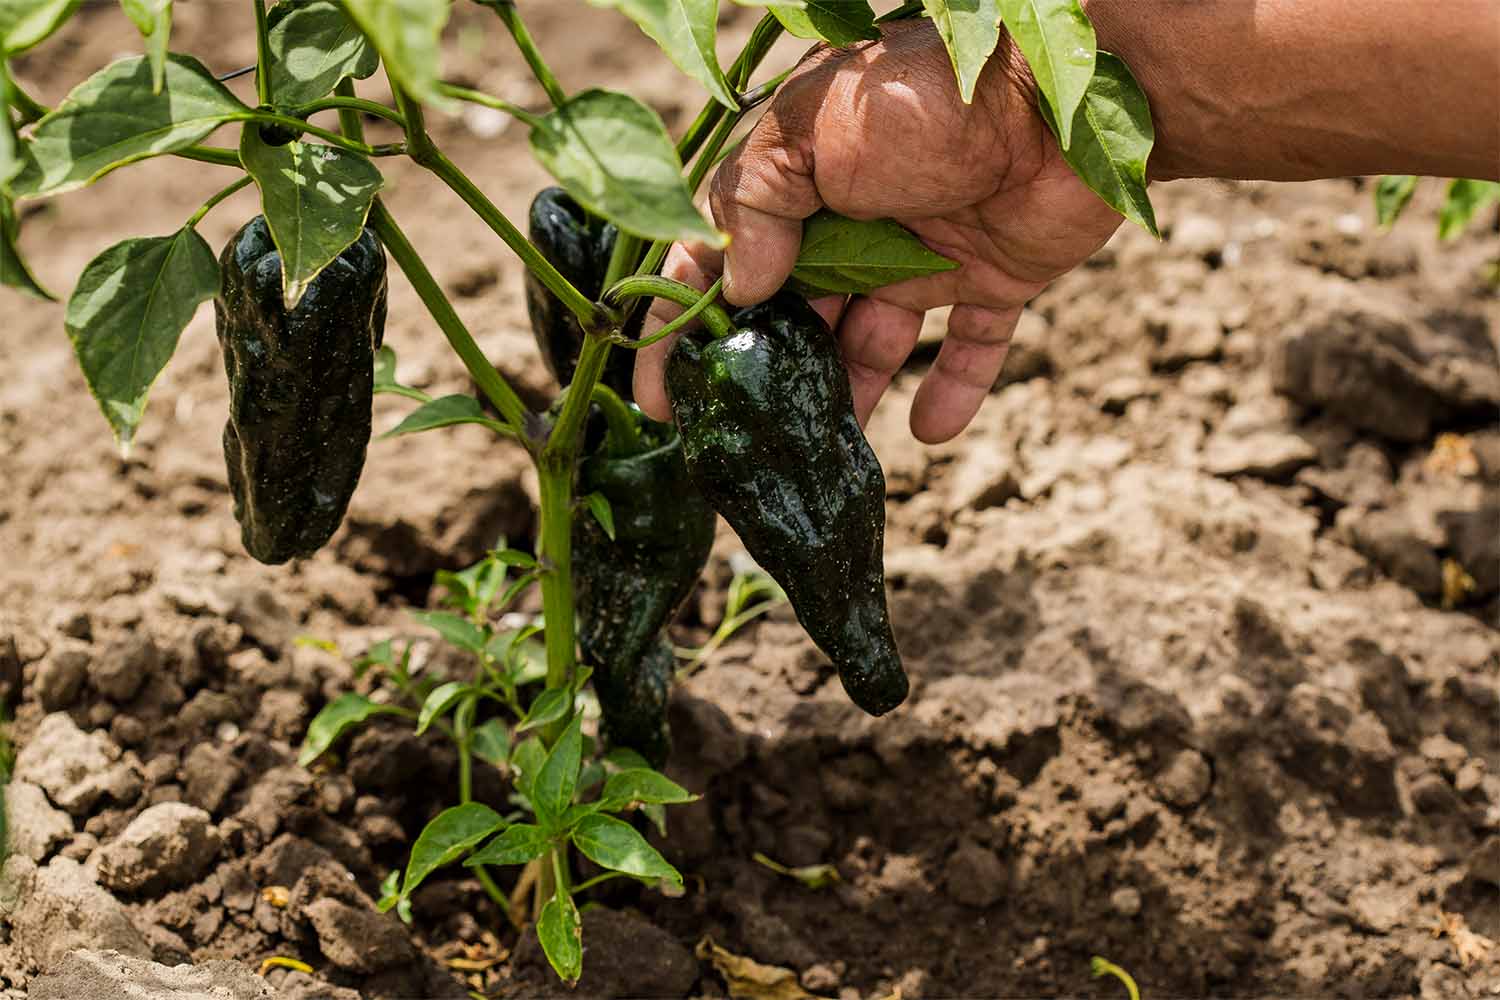 A poblano pepper in the ground, highlighted by someone's hand